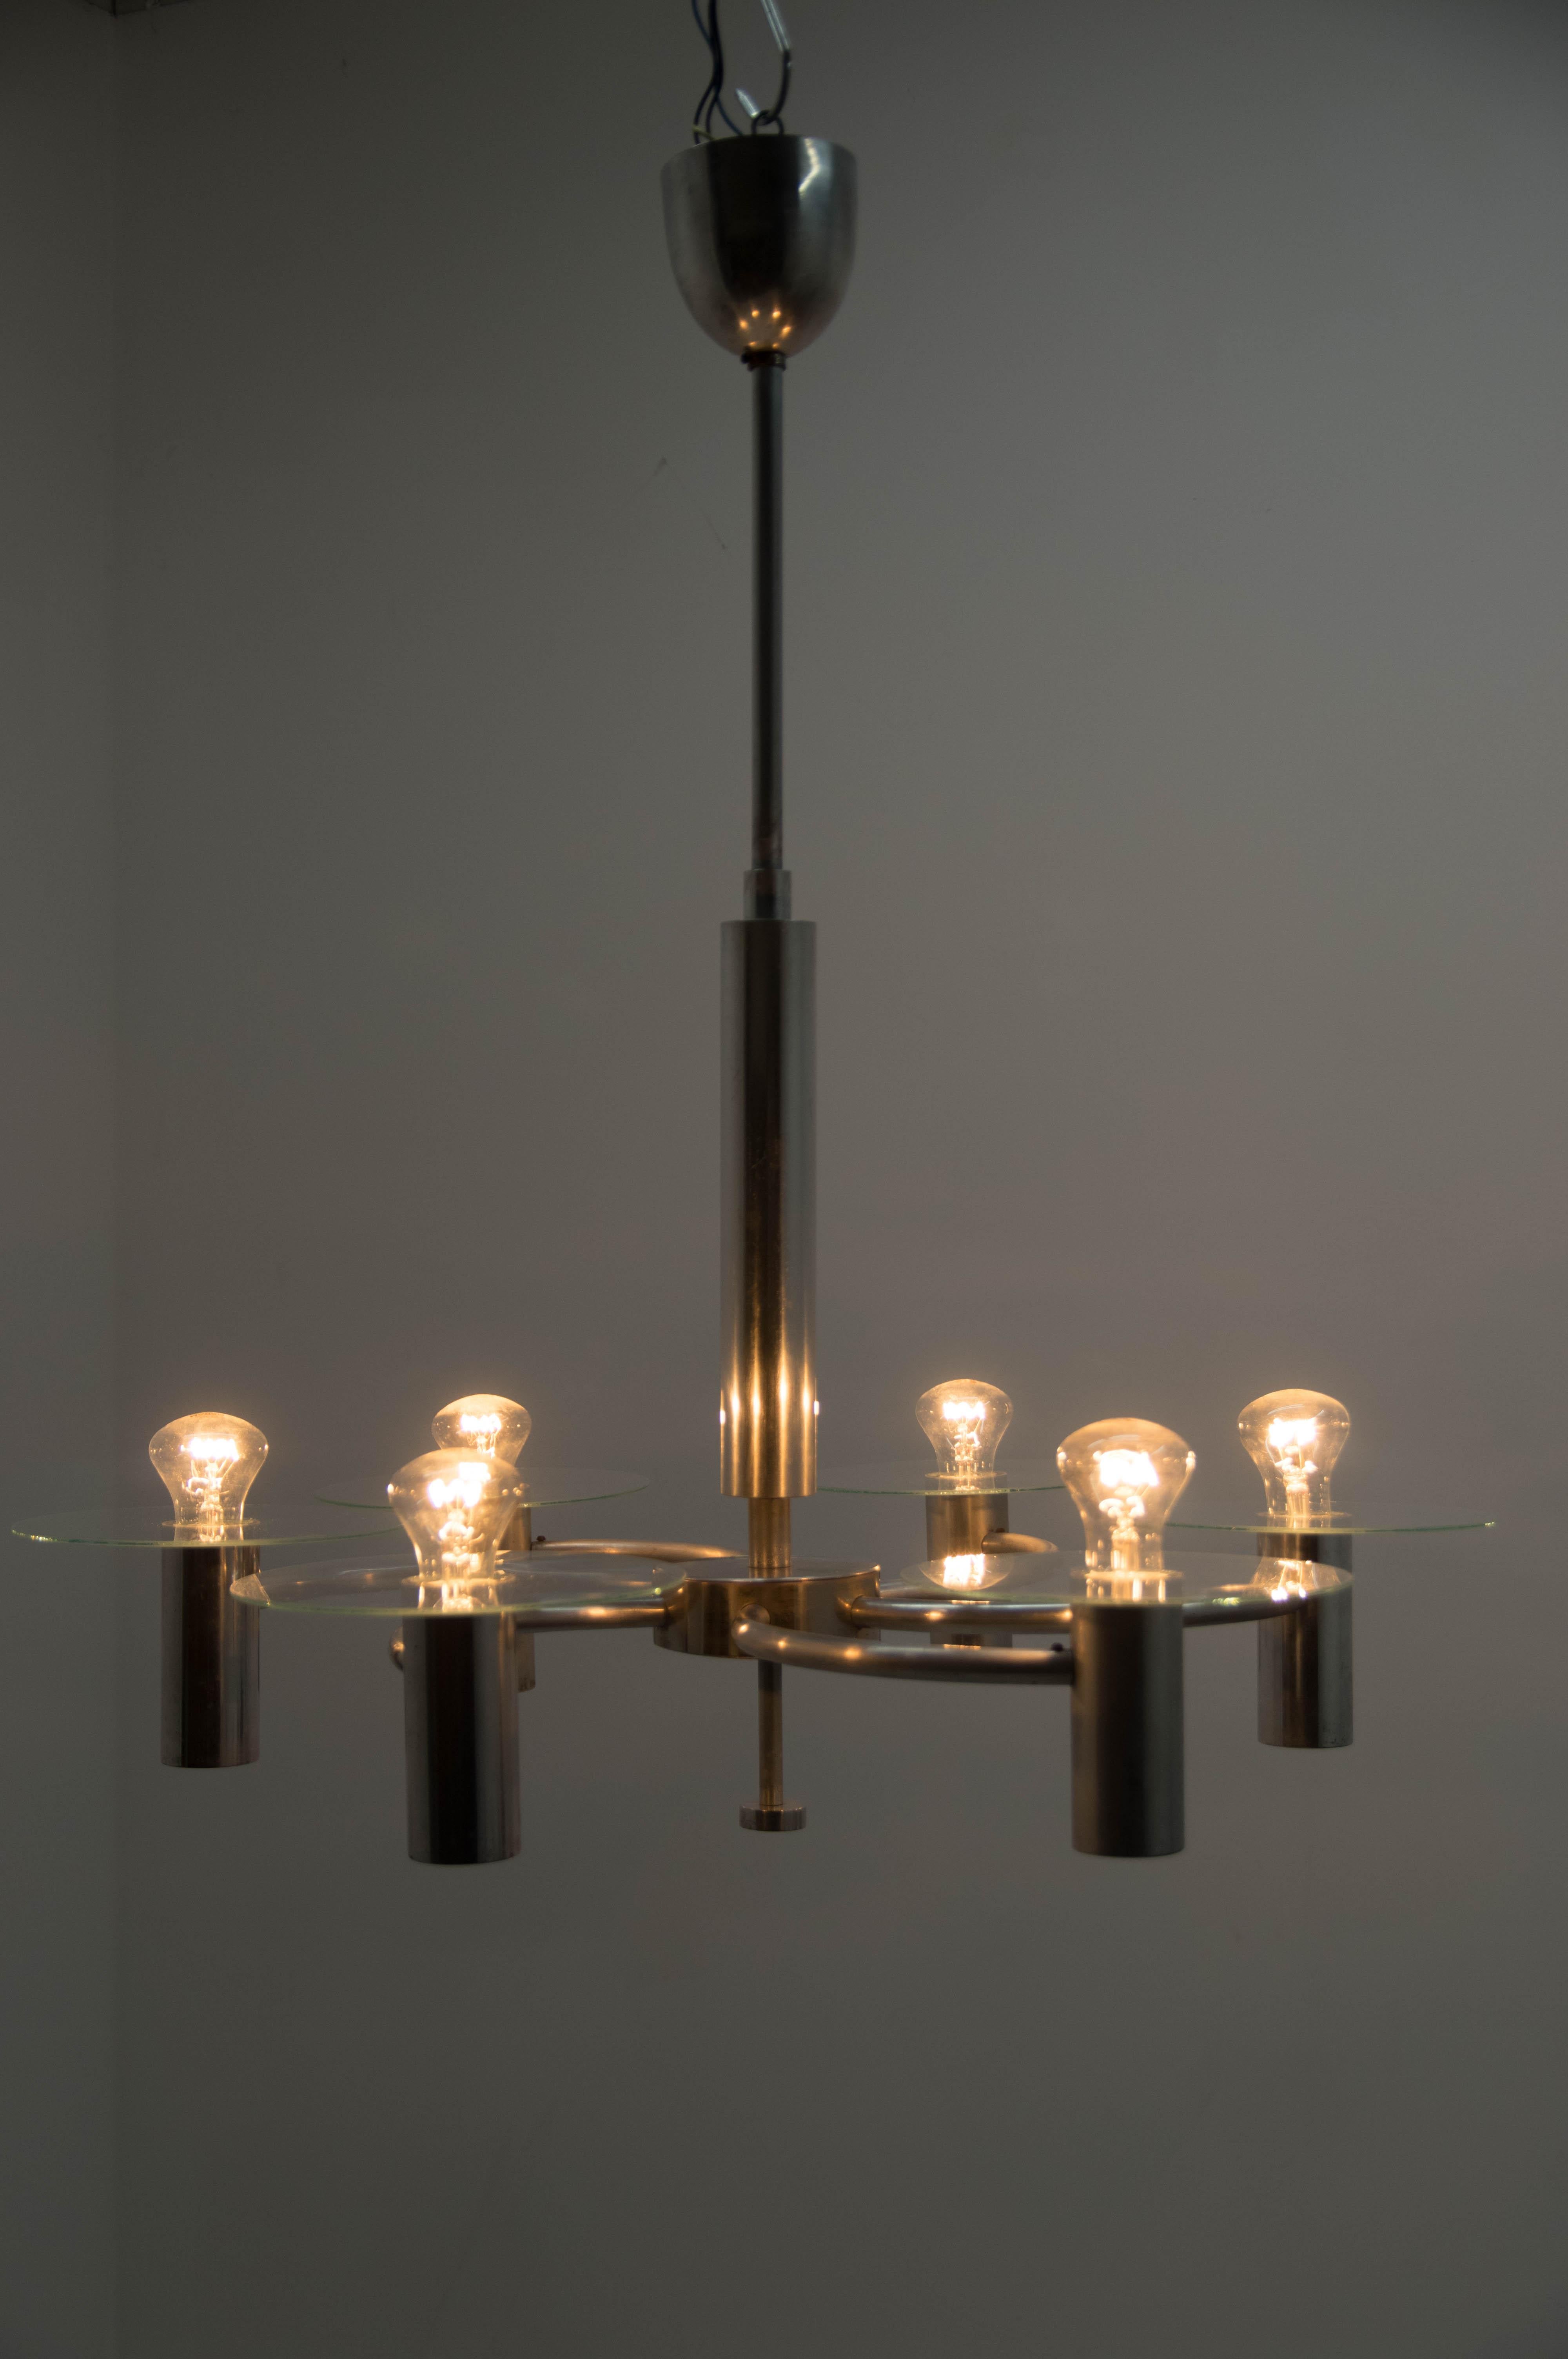 Rare Machine Age chandelier influenced by aircraft propeller.
Two separate circuits, new wiring, 6 x 60W, E27 or E26 bulbs
Minor loses on the inner hole of the glass shades are not visible when assembled.